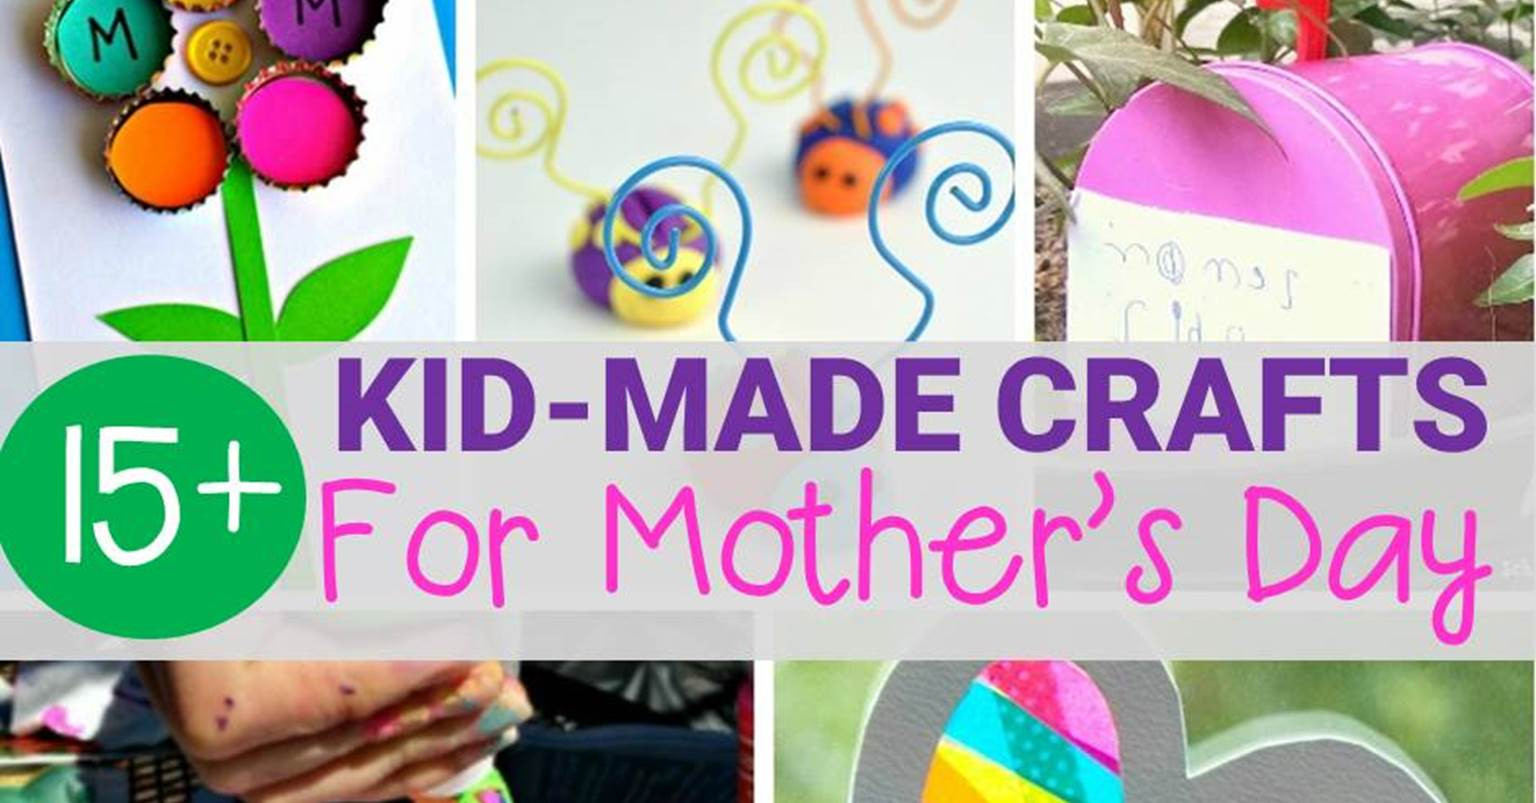 Crafts To Make For Mother's Day
 Kid Made Mother s Day Crafts Moms Will Love